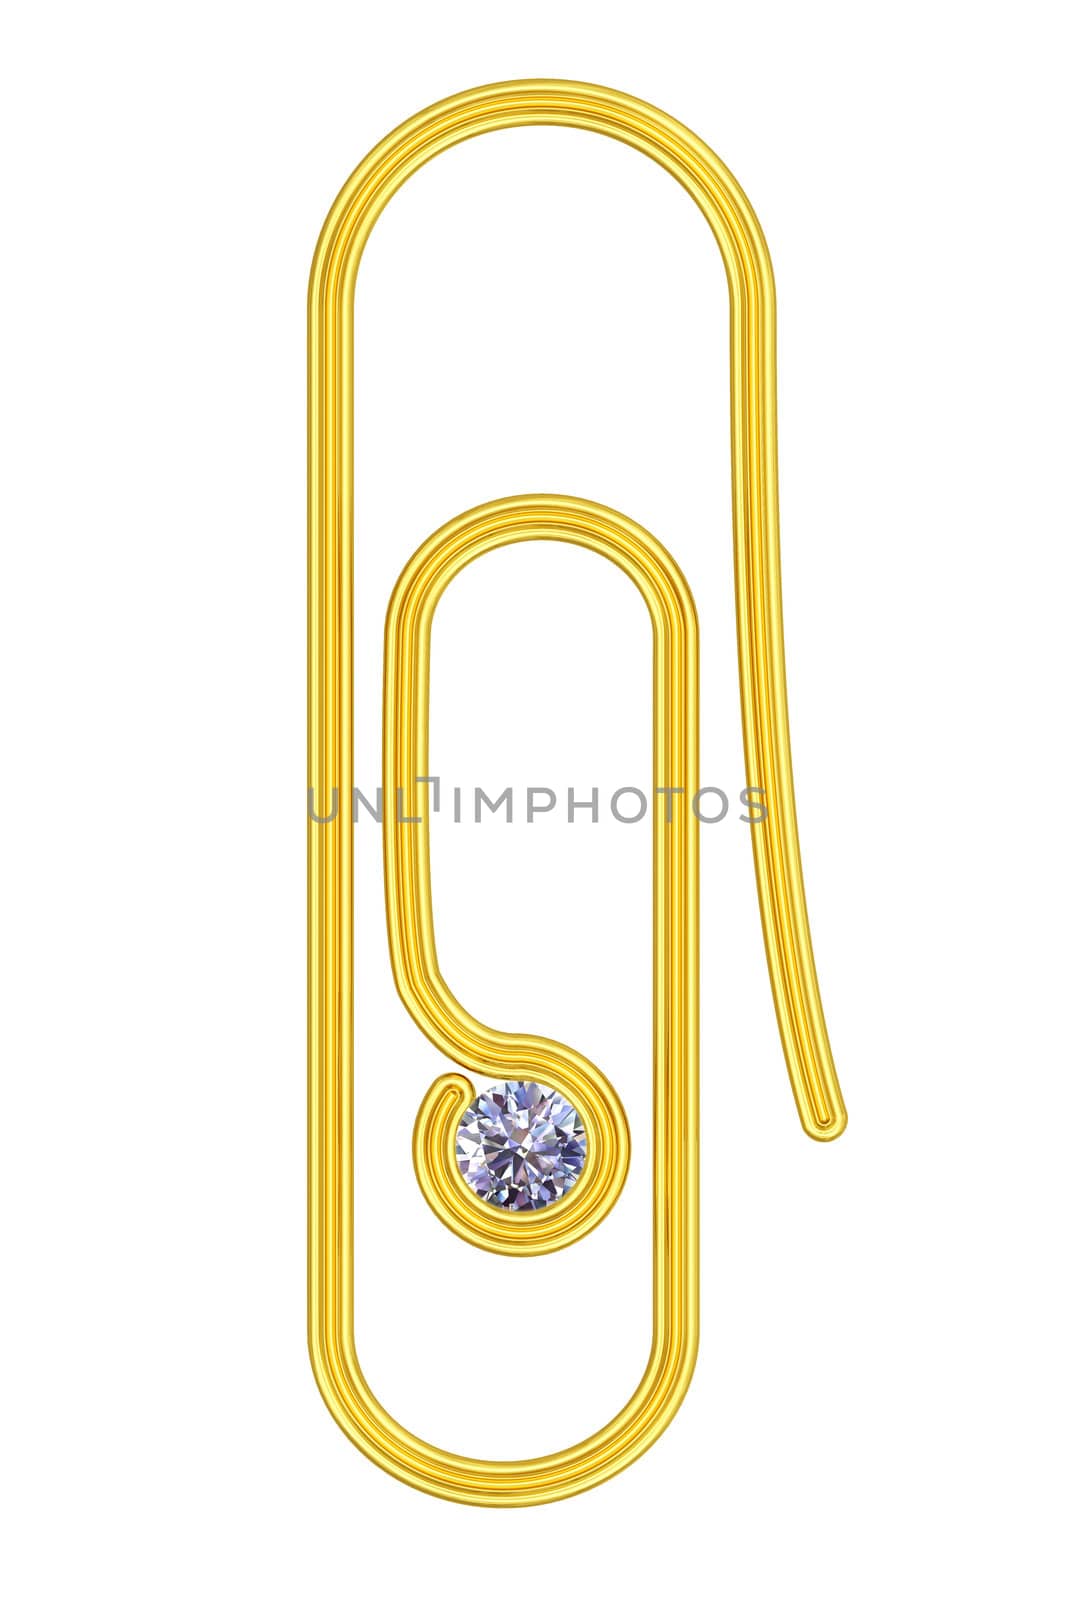 Golden paperclip with diamond isolated on white background. High resolution 3D image
